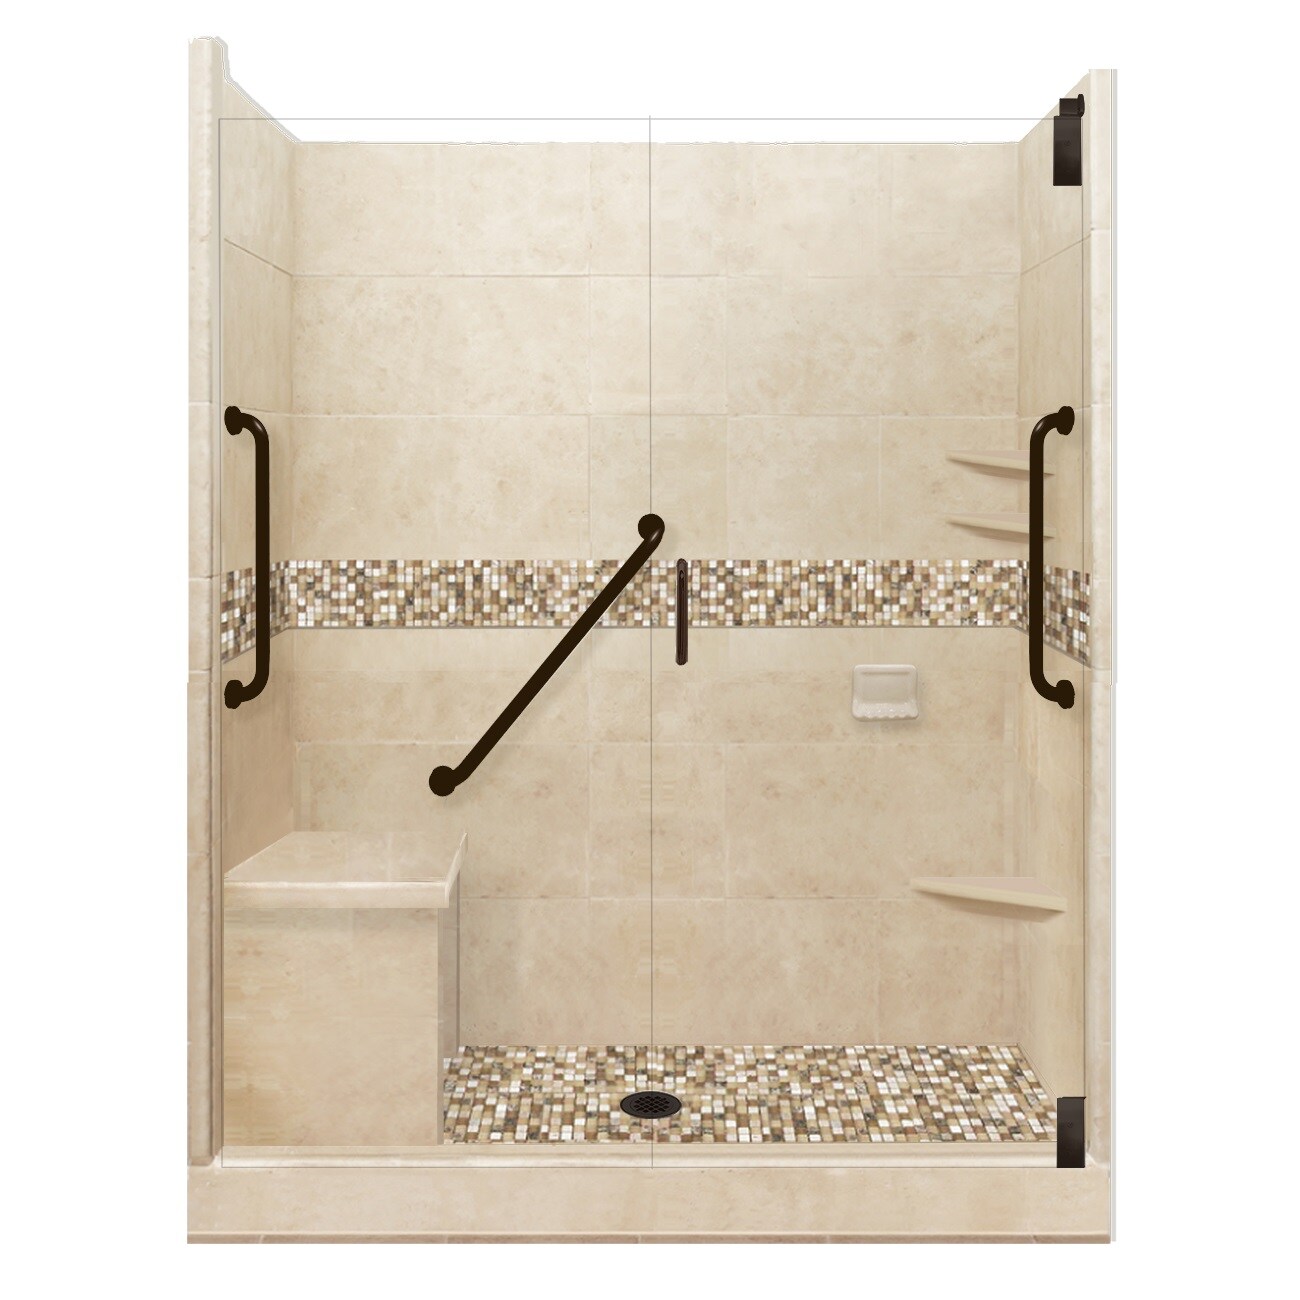 Laurel Mountain Whitwell ADA Roll-In Zero Threshold- Barrier Free White 33-in  x 62-in x 78-in One-piece Shower Kit (Center Drain) with Folding Seat, Base,  Wall and Drain Included in the Shower Stalls